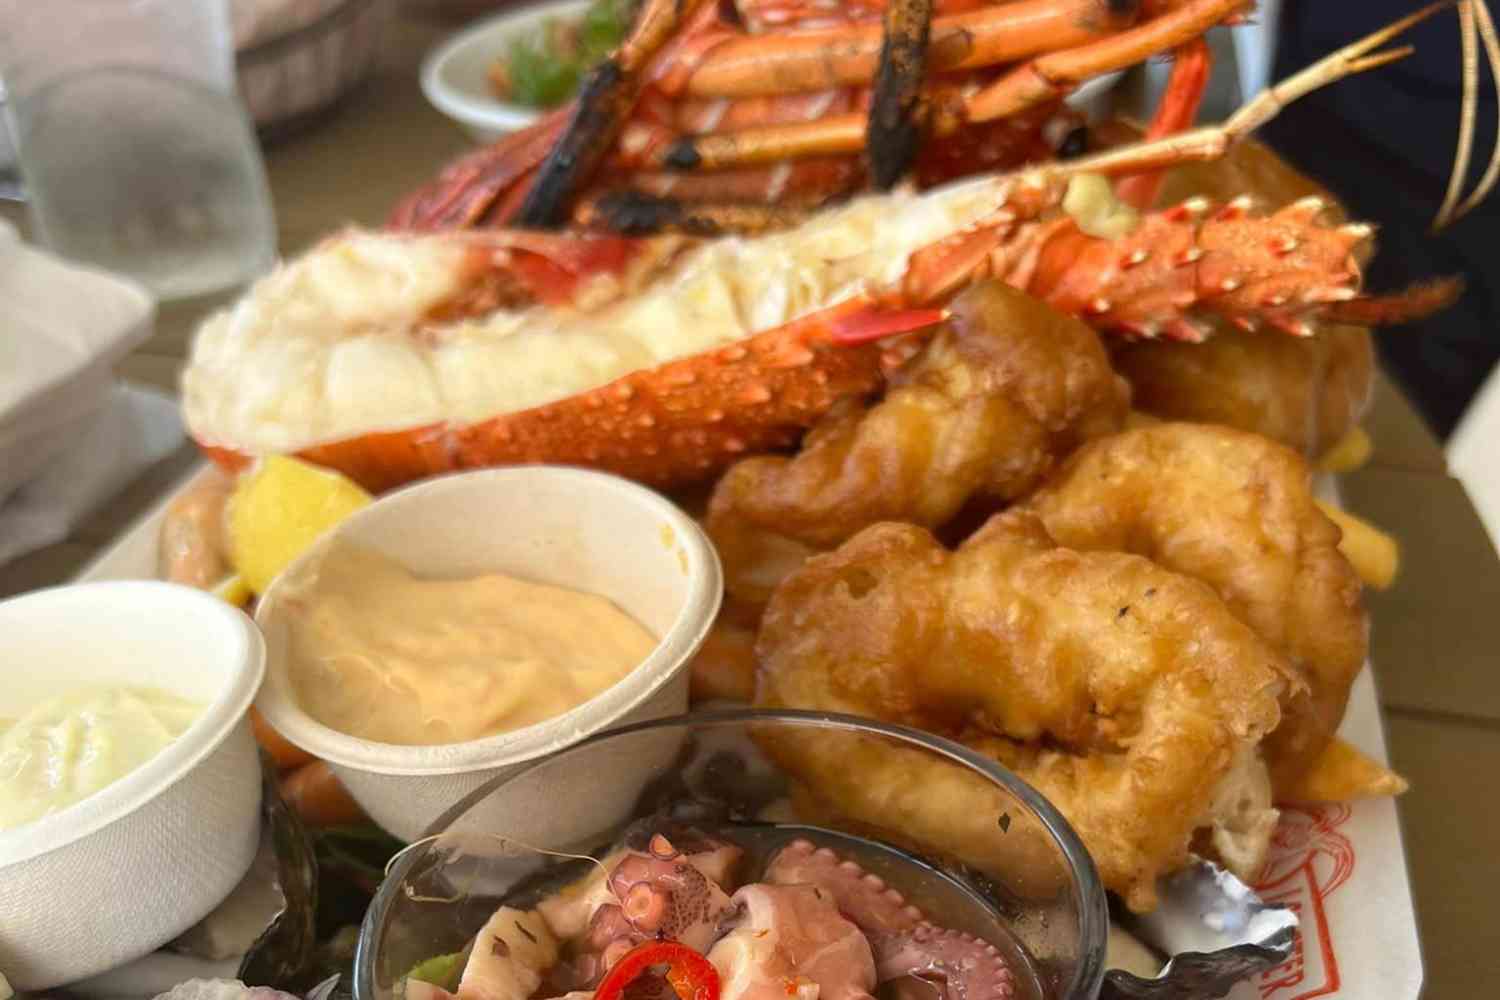 Image of a seafood platter